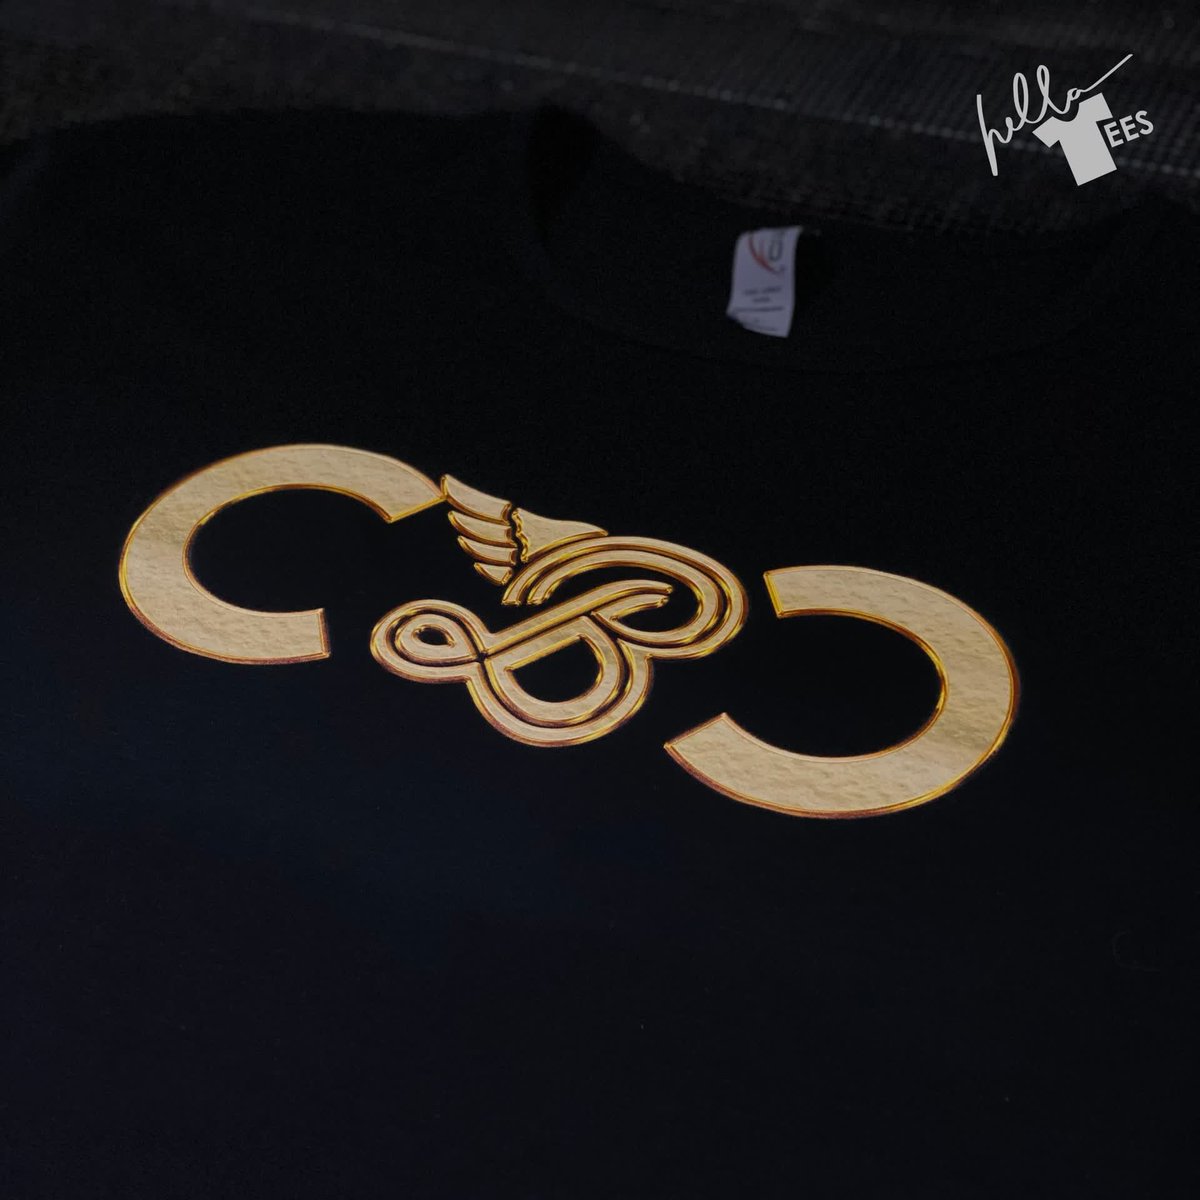 When in doubt, go for the gold! This DTG print is 🔥
.
.
.
#hellatees #unity #tshirtprinting #sanjosetshirtprinting #customshirt #customshirts #teeshirt #cooltees #teedesign #customizedshirt​ #customizedshirts #shirtoftheday #tee #directtogarmentprinting #dtgprinting #branding